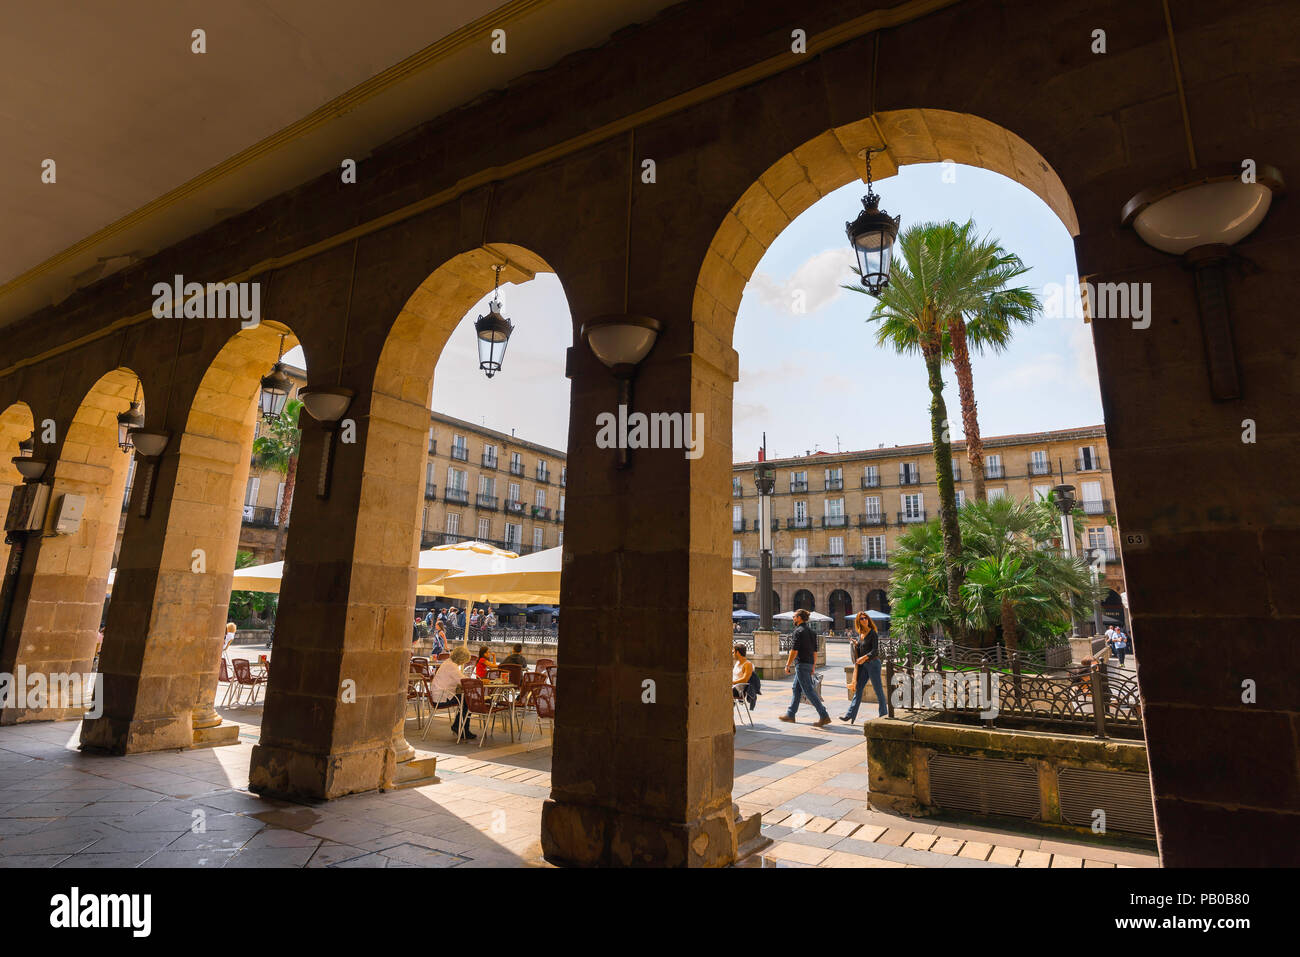 Bilbao Plaza Nueva, view of the square from within the colonnade that surrounds the Plaza Nueva in the Old Town (Casco Viejo) area of Bilbao, Spain. Stock Photo